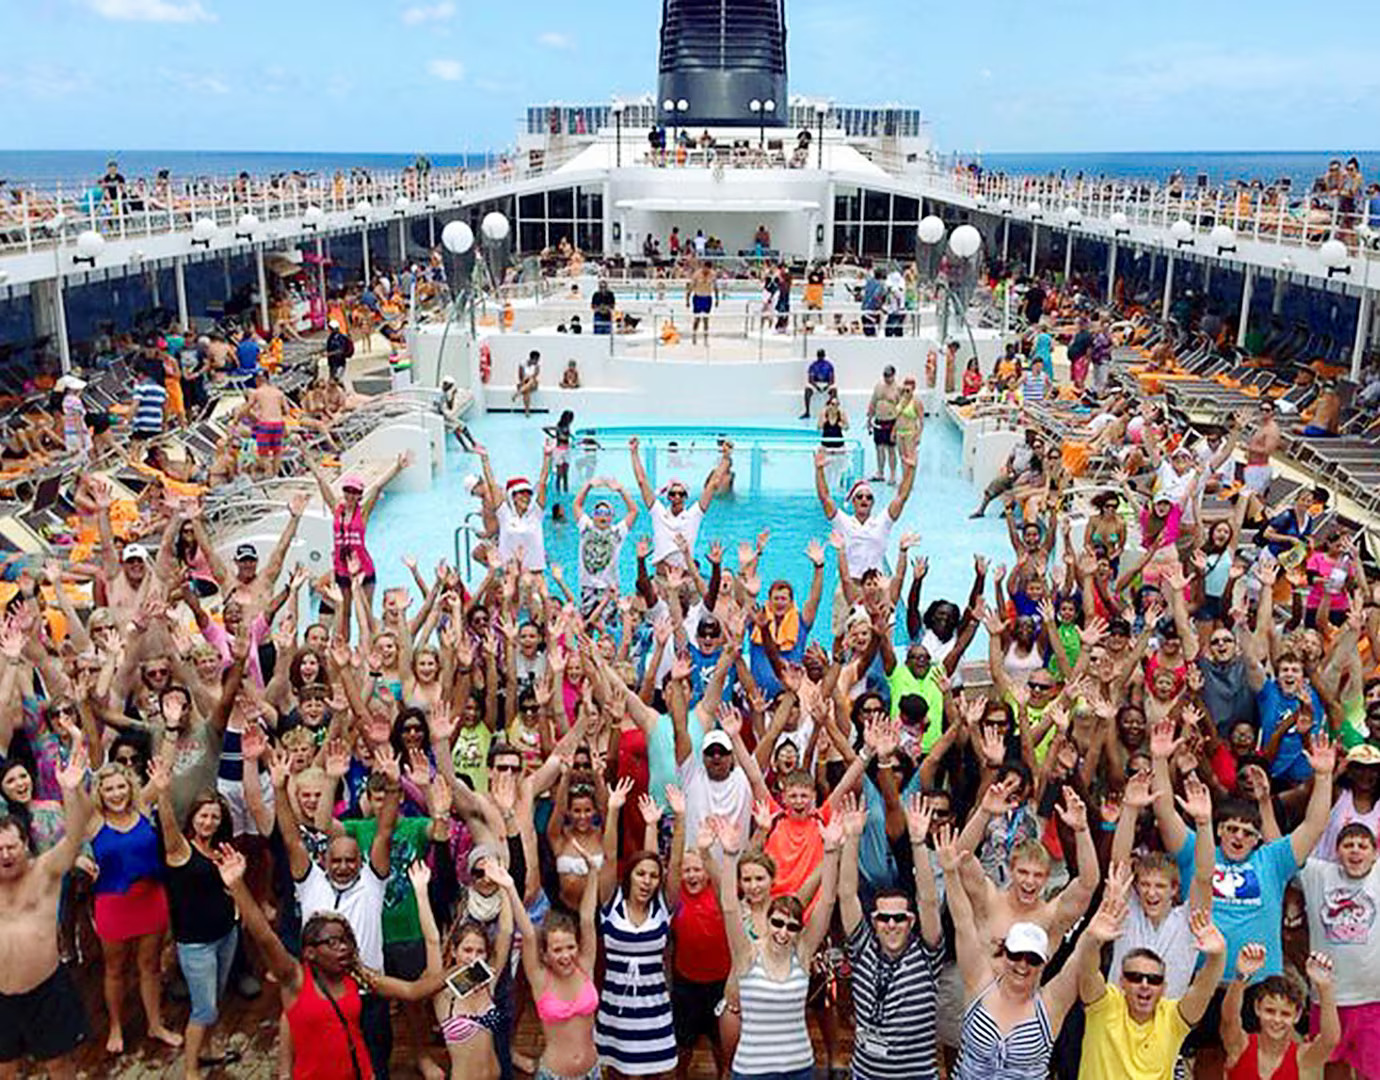 Pool deck party on an MSC cruise